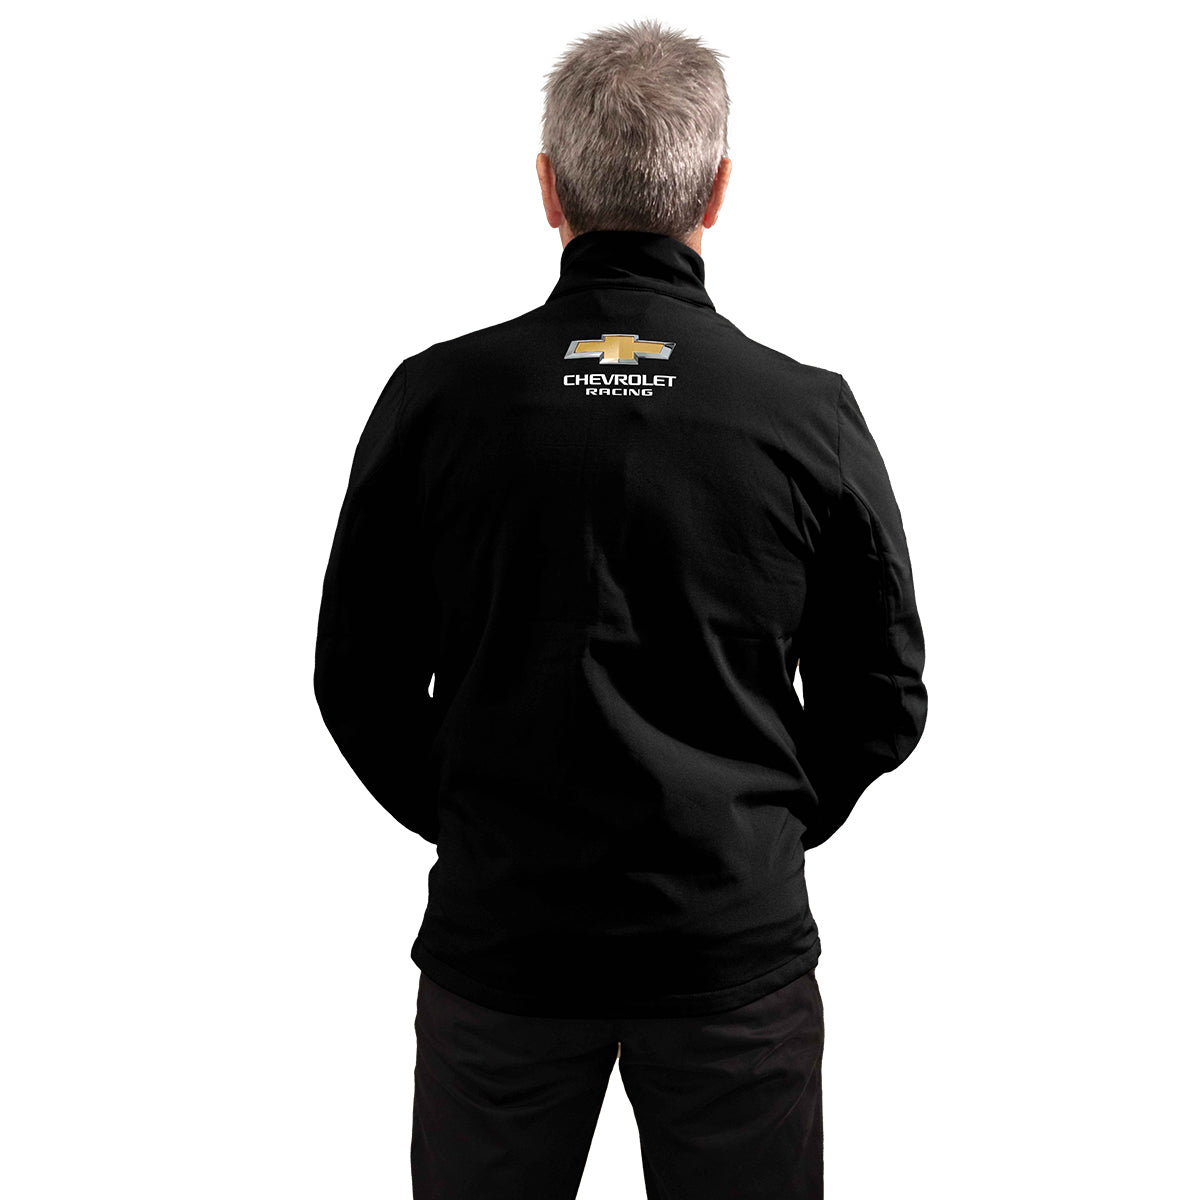 Chevrolet Racing Outerwear Jacket